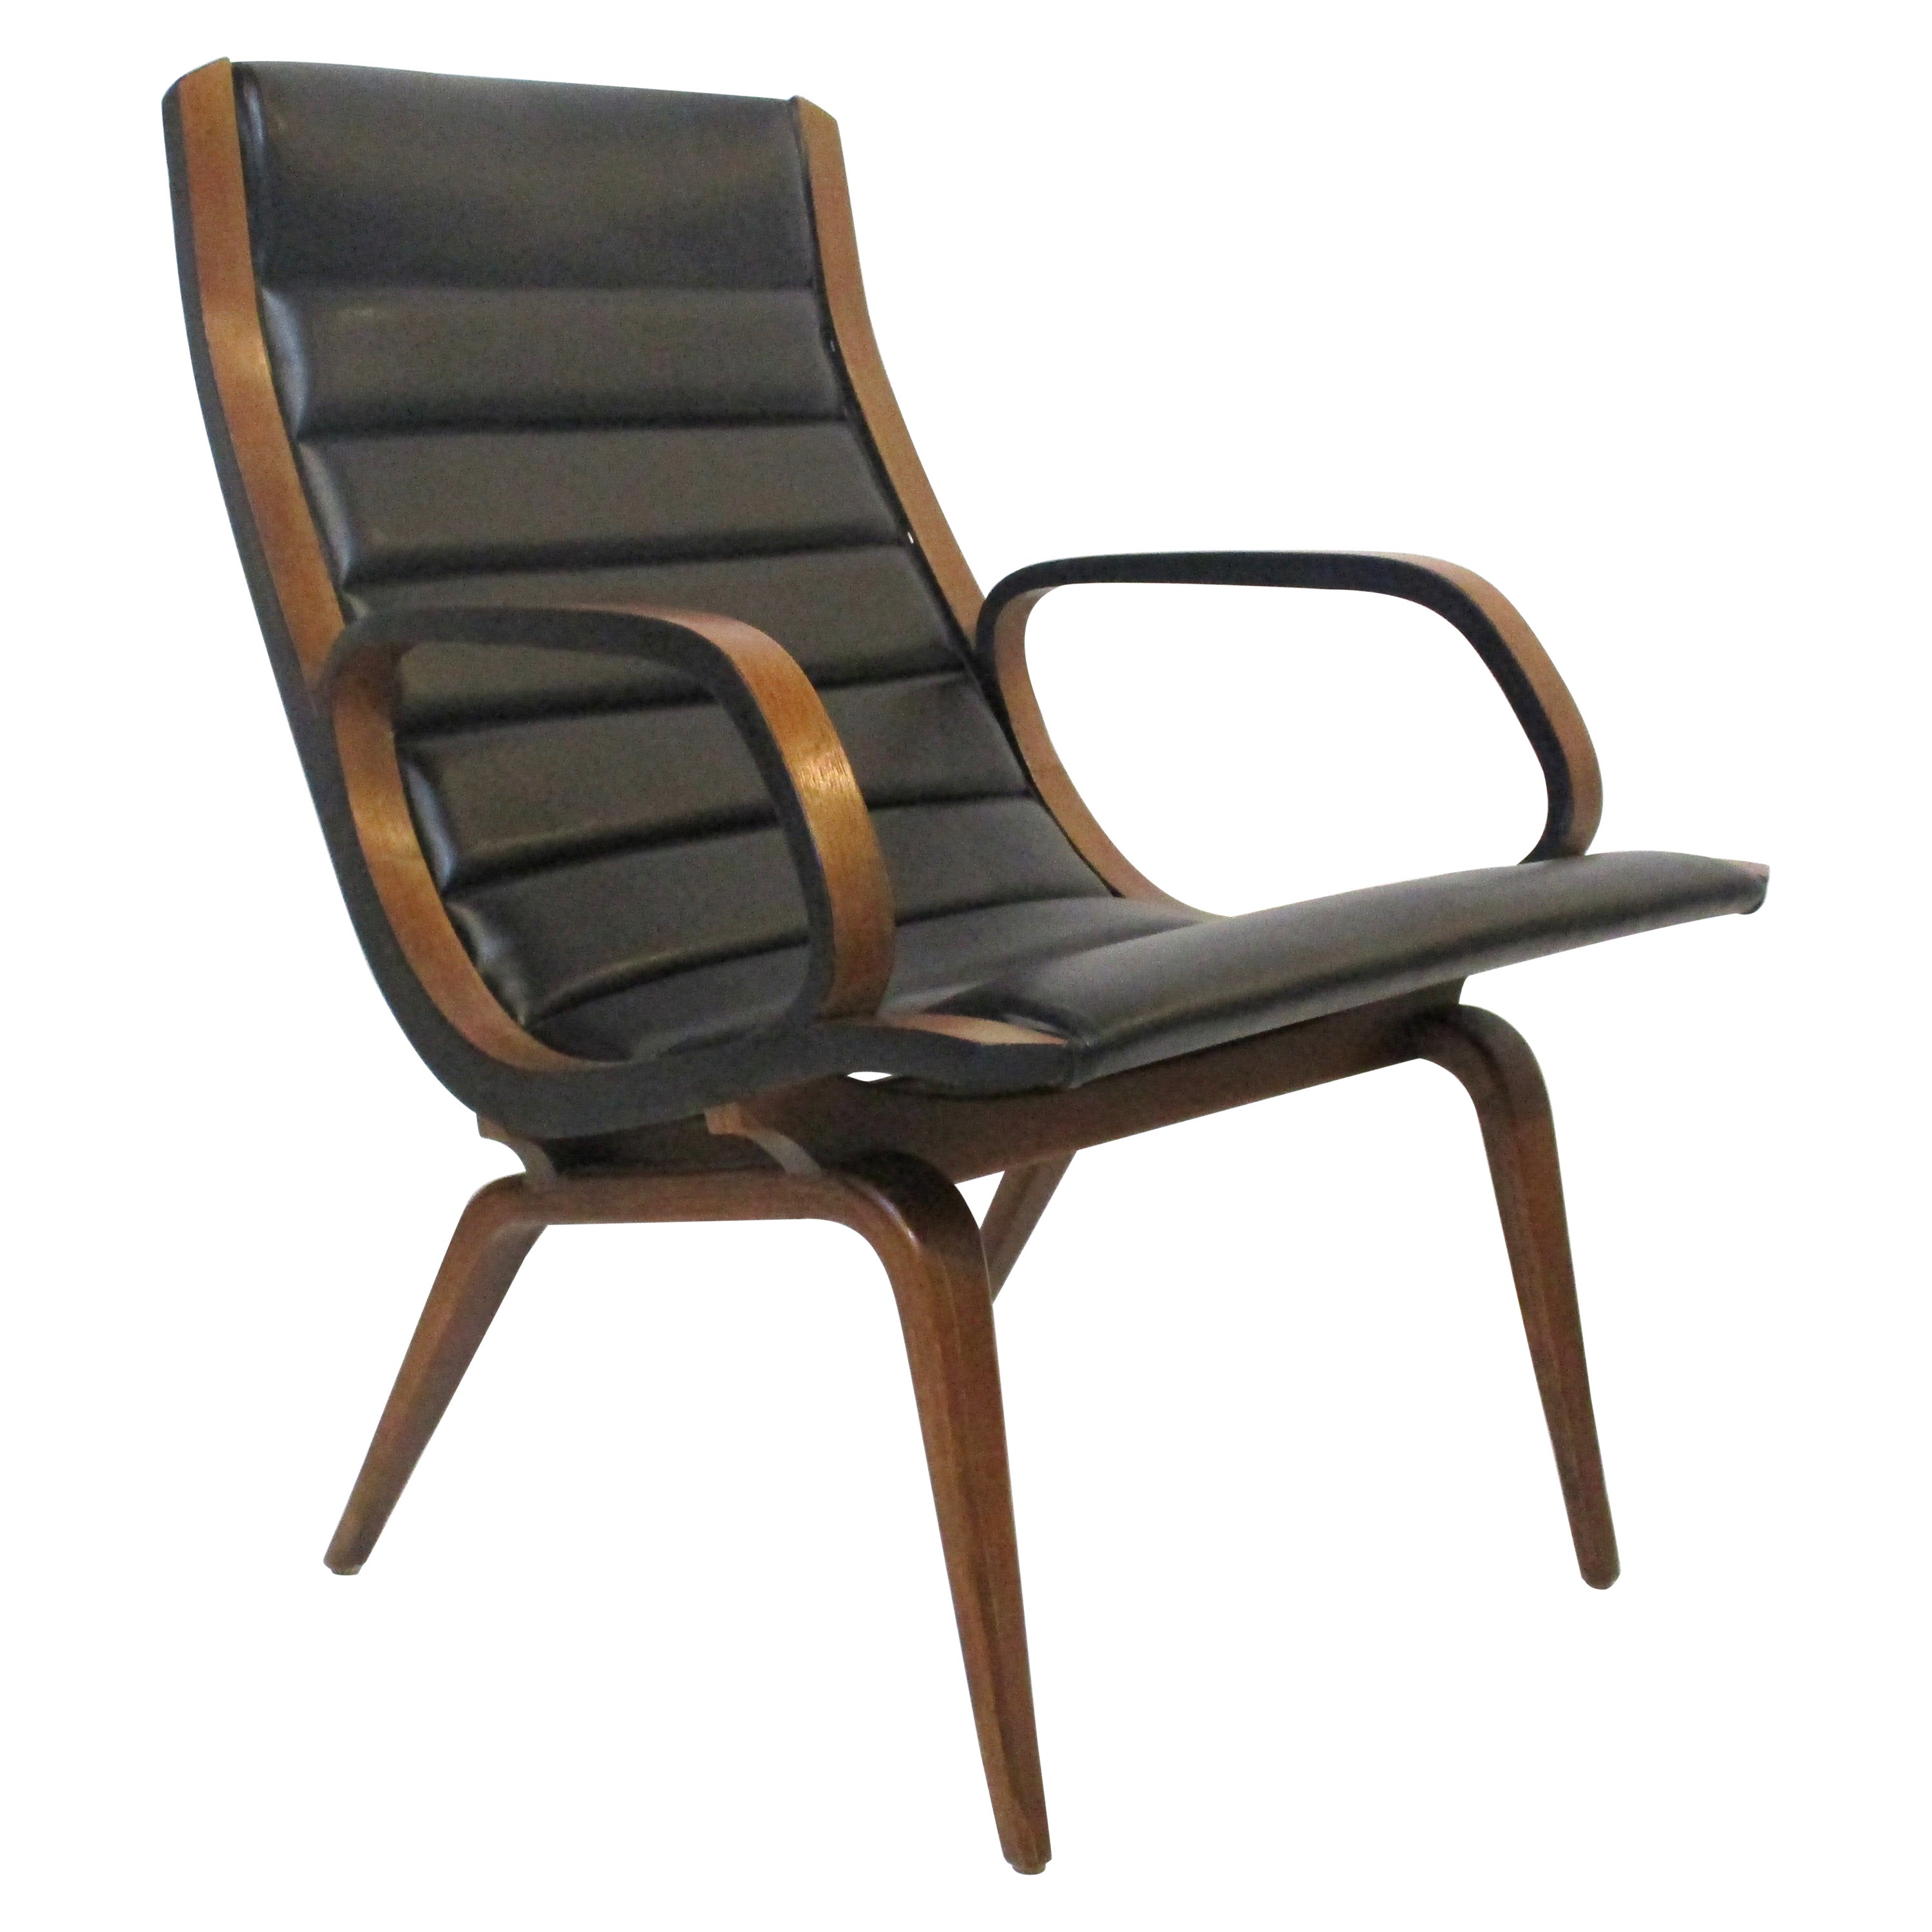 Rare Sculptural Arm / Lounge Chair by Norman Chener for Plycraft